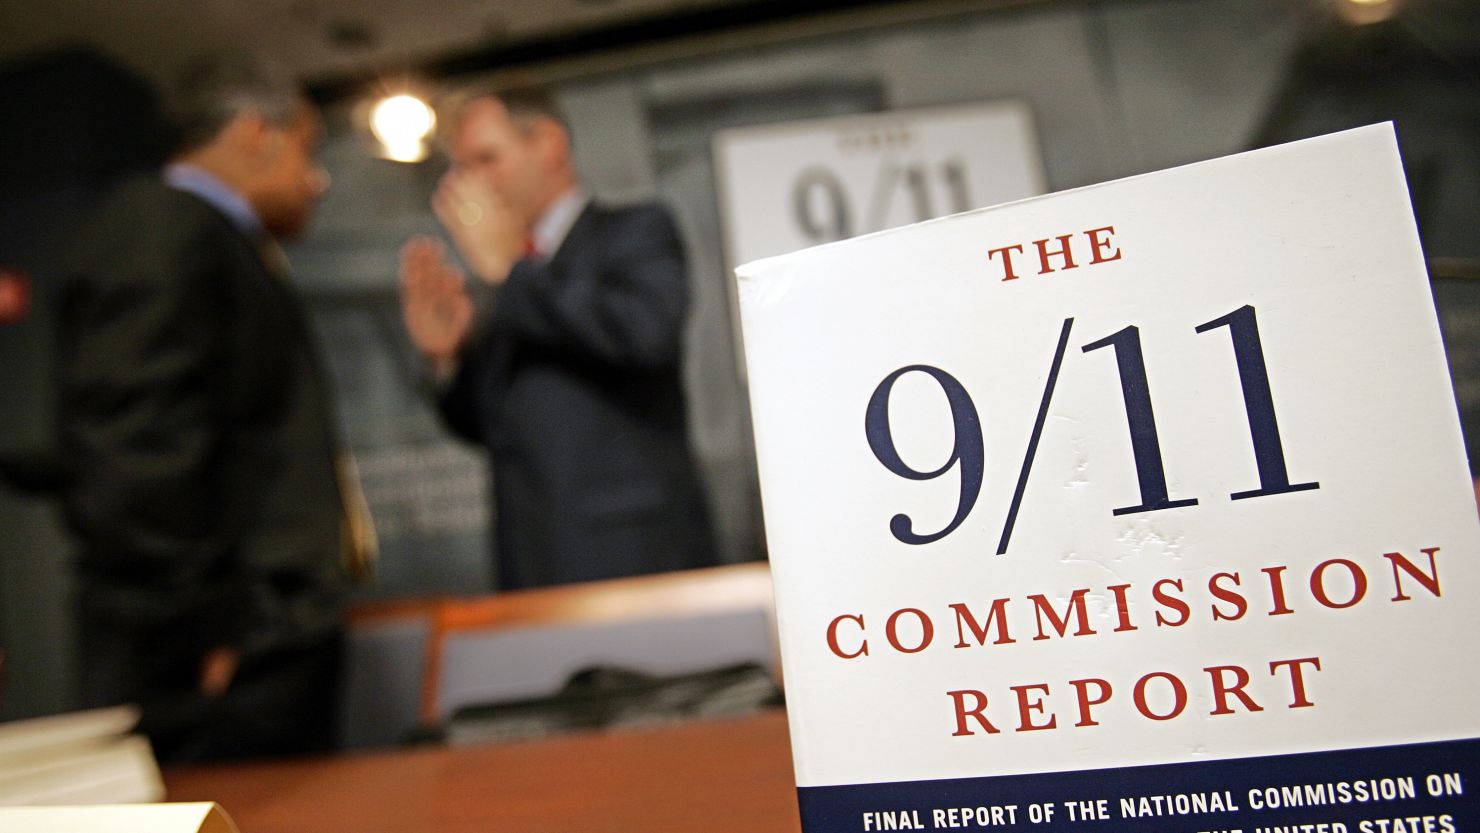 911 commission report